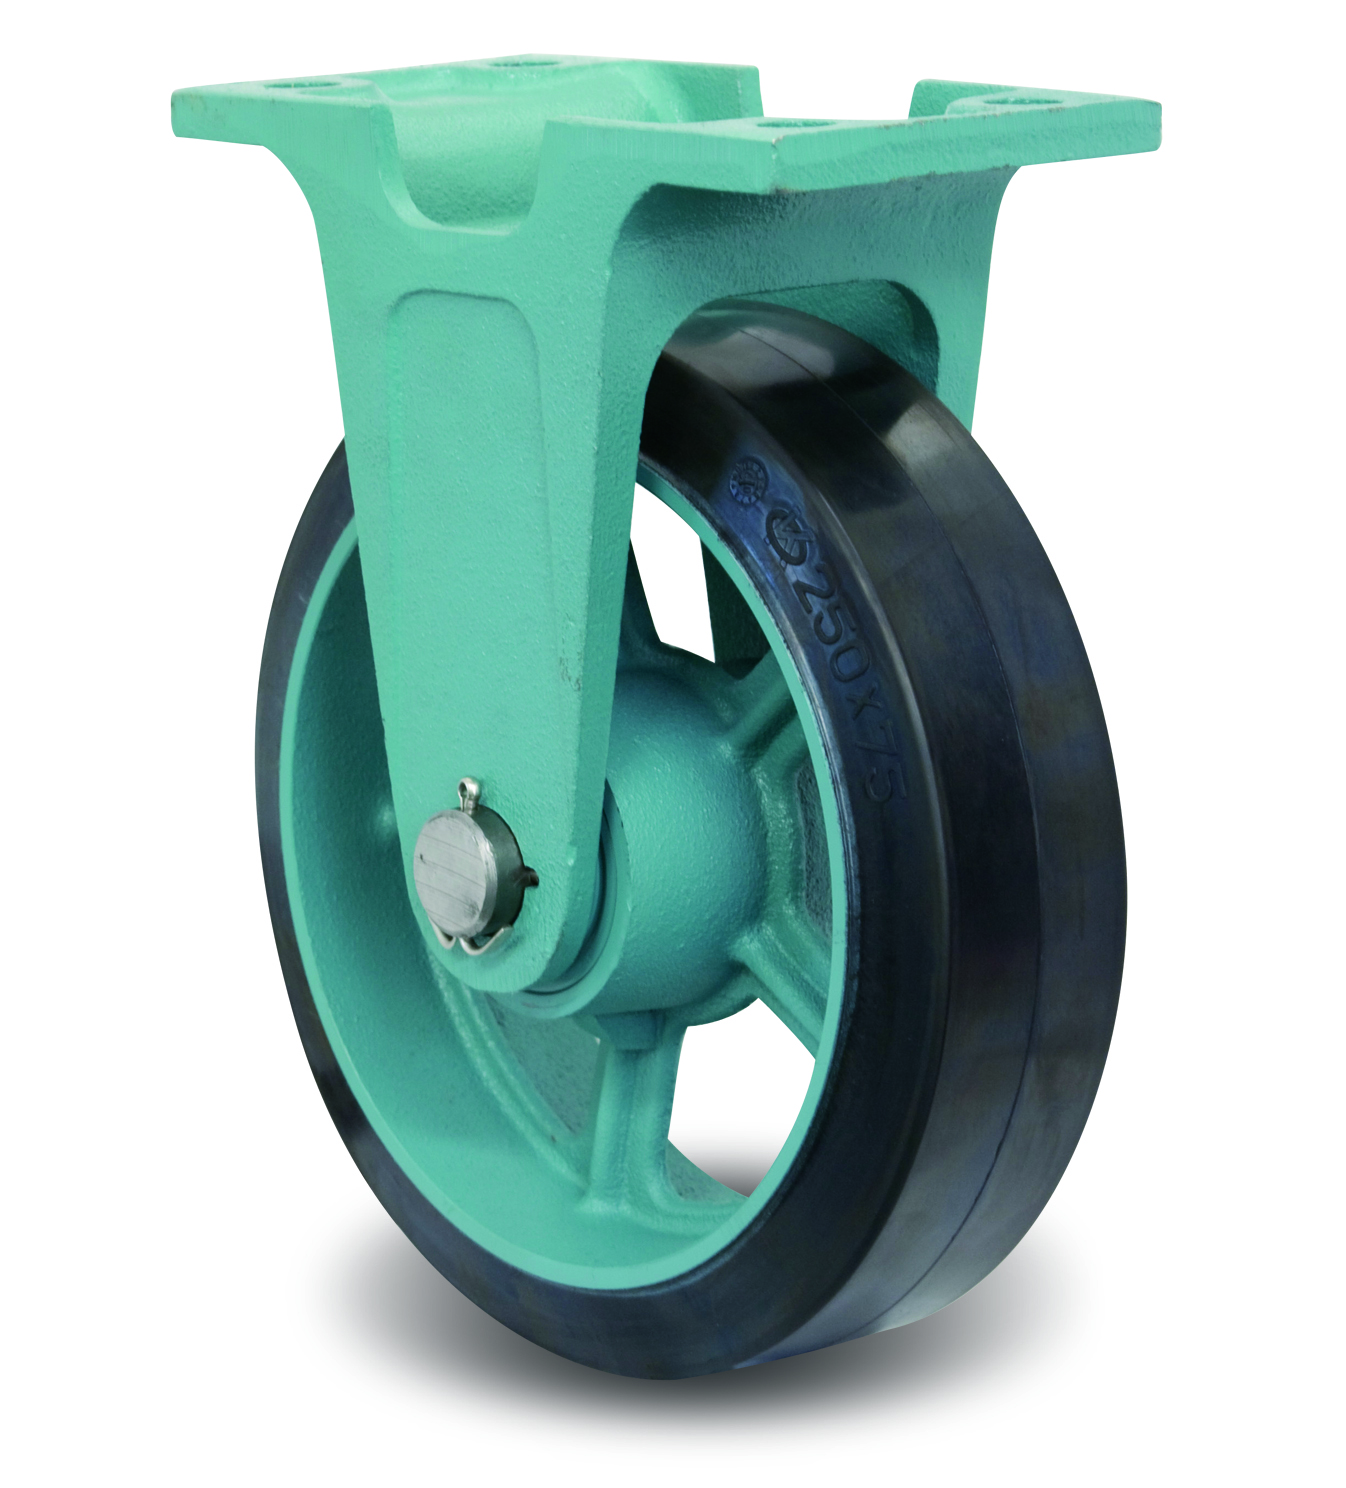 Casters - Wide Type Ductile Steel Fixed Plate Rubber, MG-W, E/MG-W Series. EMG-W130X50